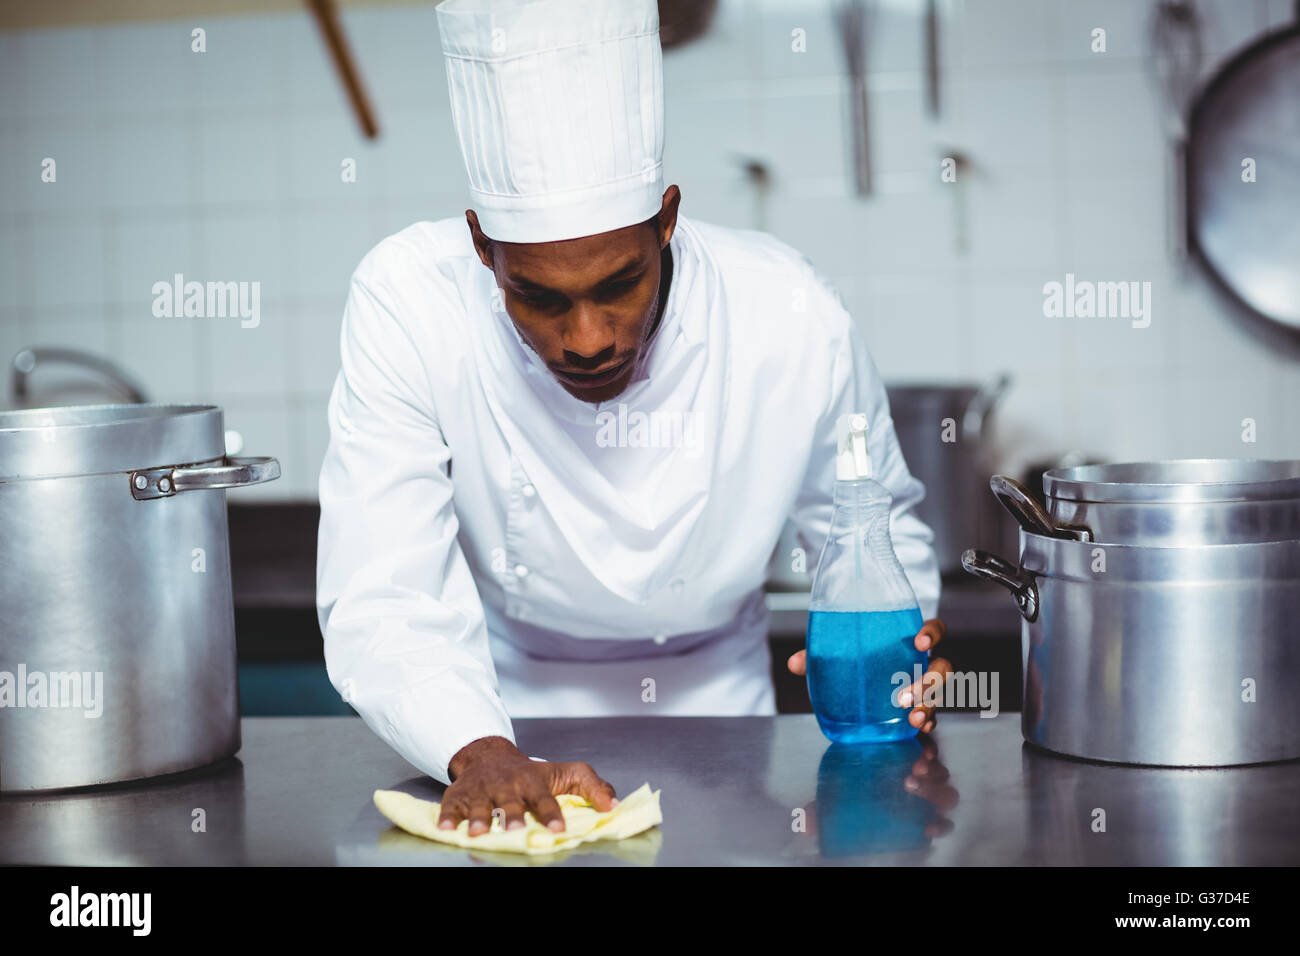 Chef cleaning kitchen counter Stock Photo